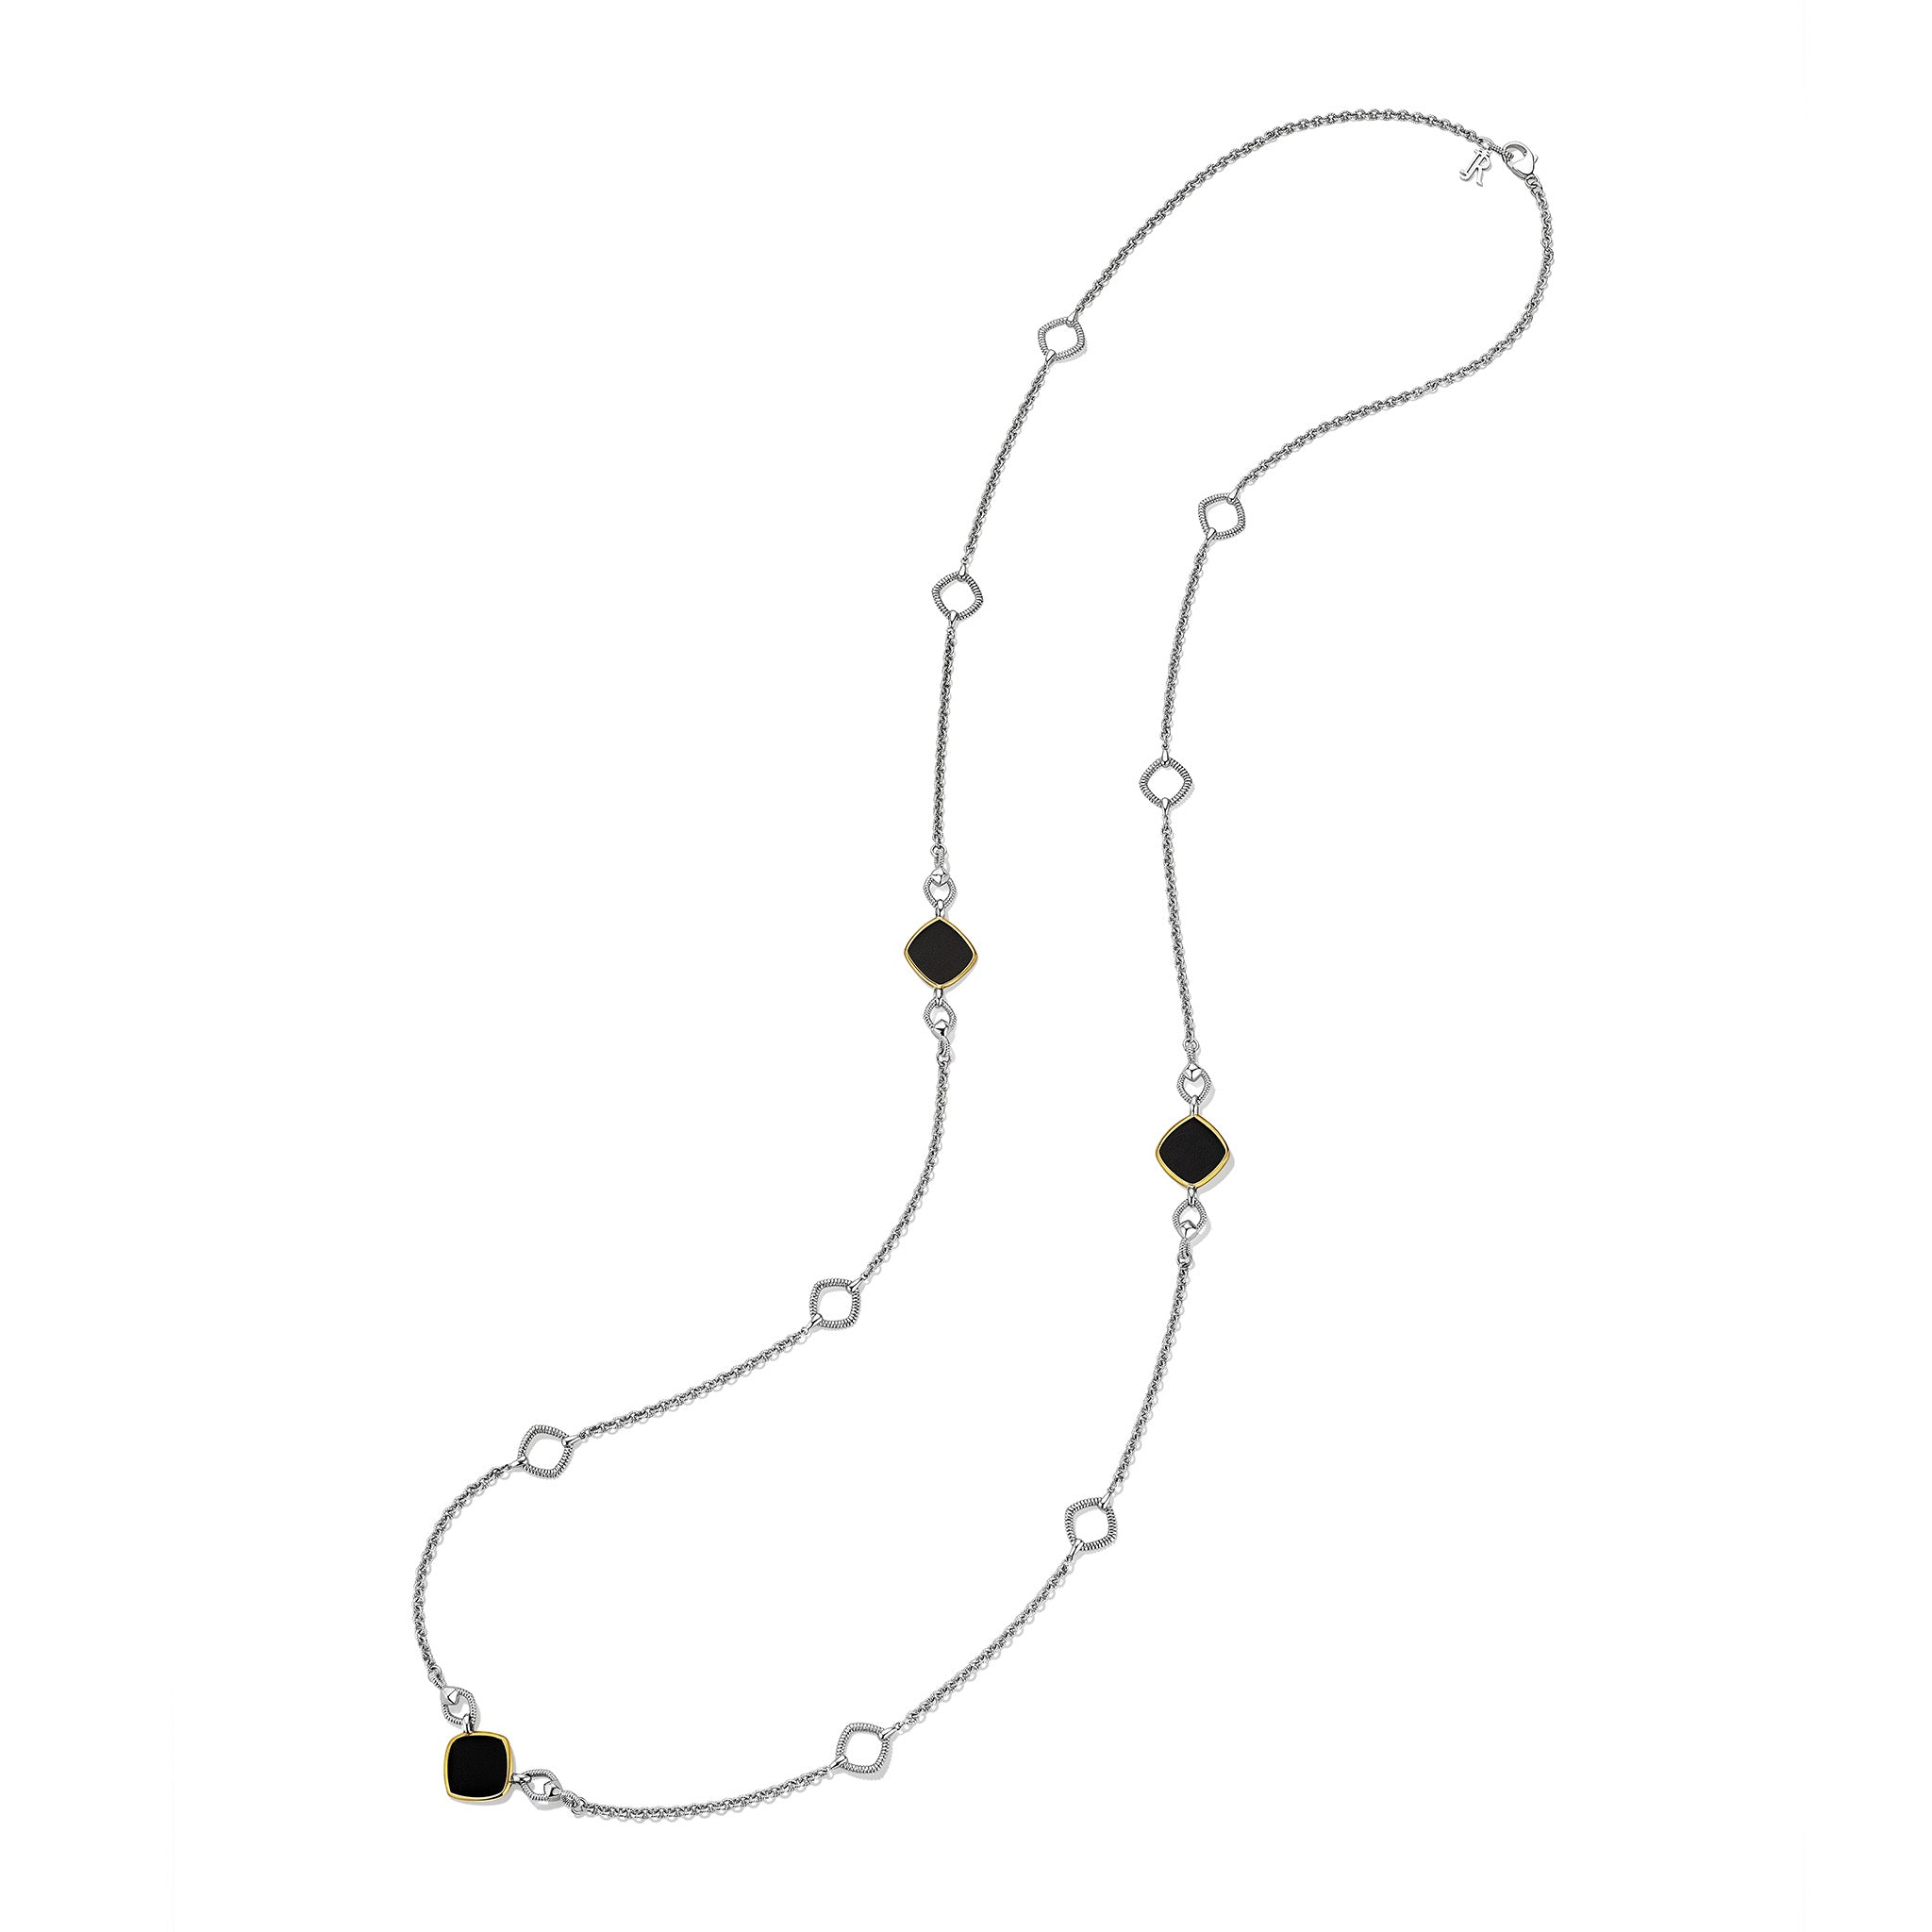 Eternity Long Station Necklace with Black Onyx and 18K Gold